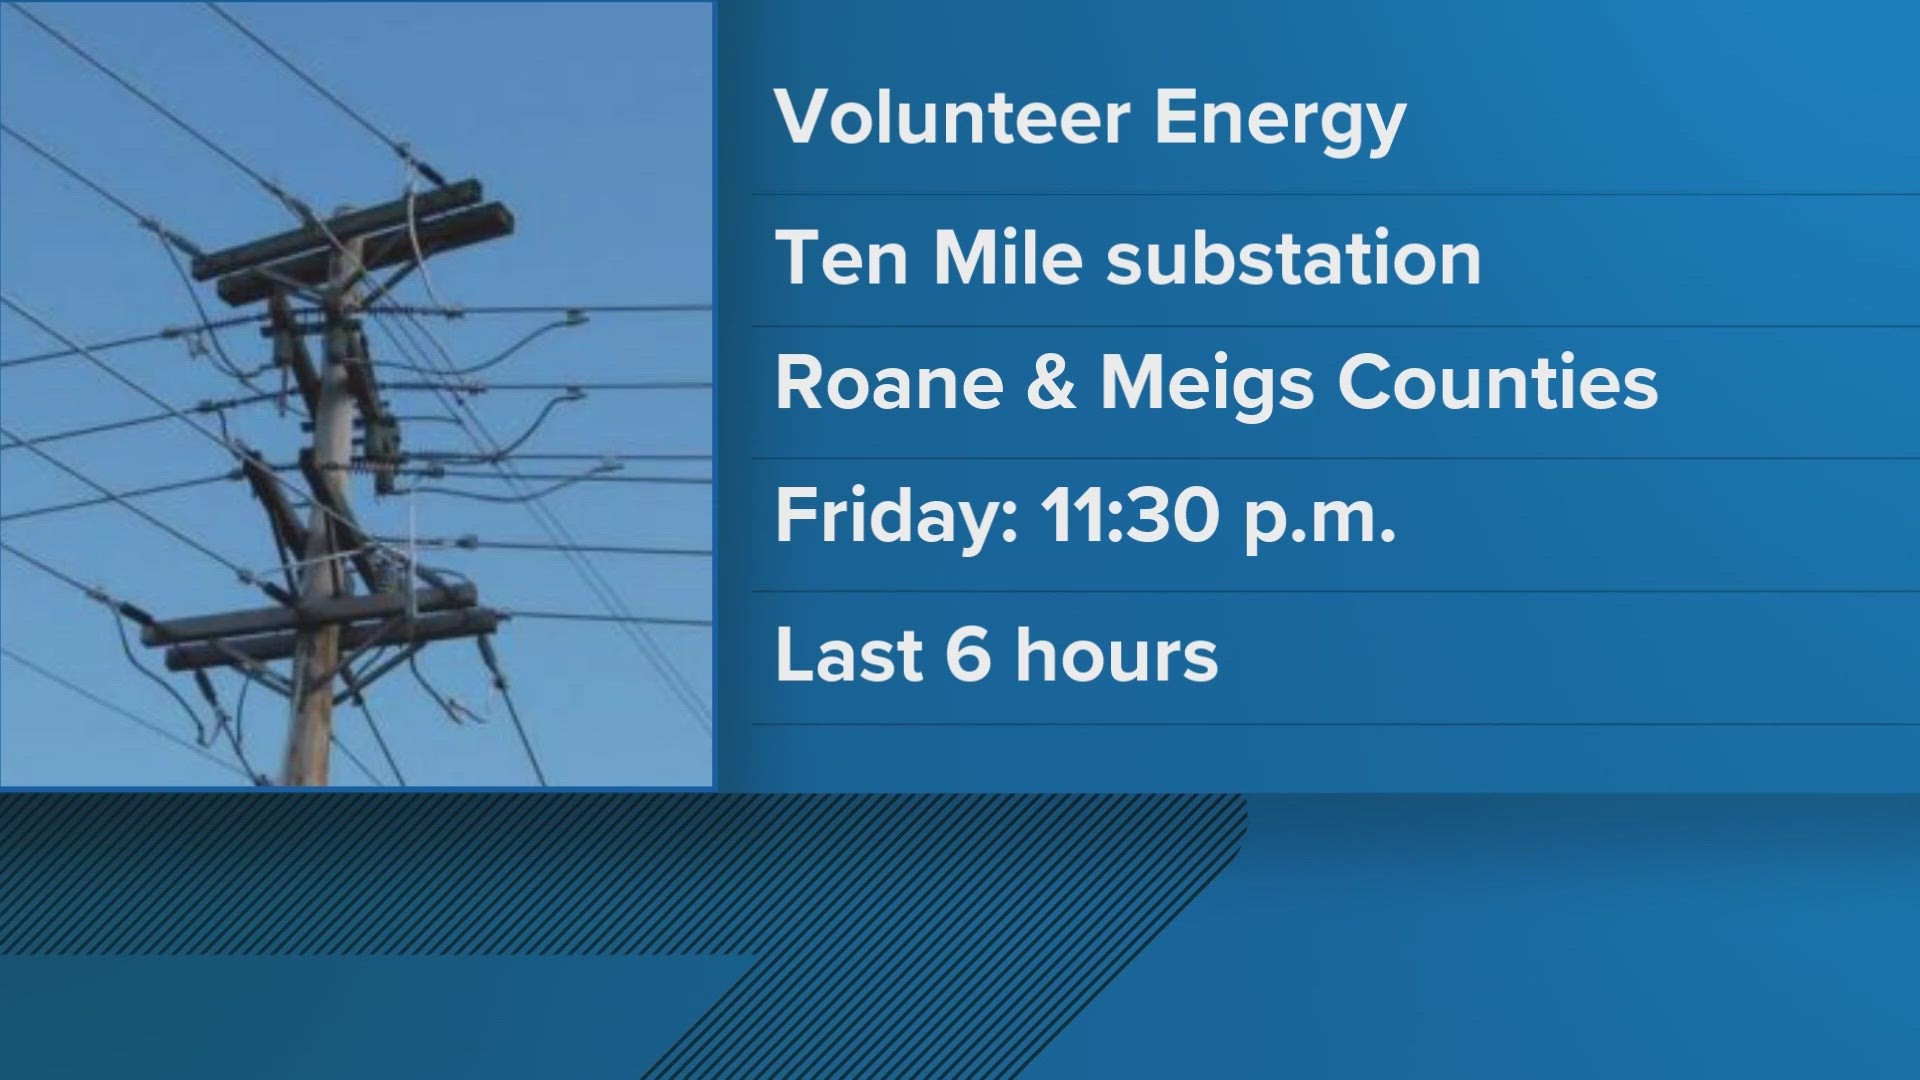 The purpose of the outage is to allow the Tennessee Valley Authority crews to safely work in the area, VEC said.